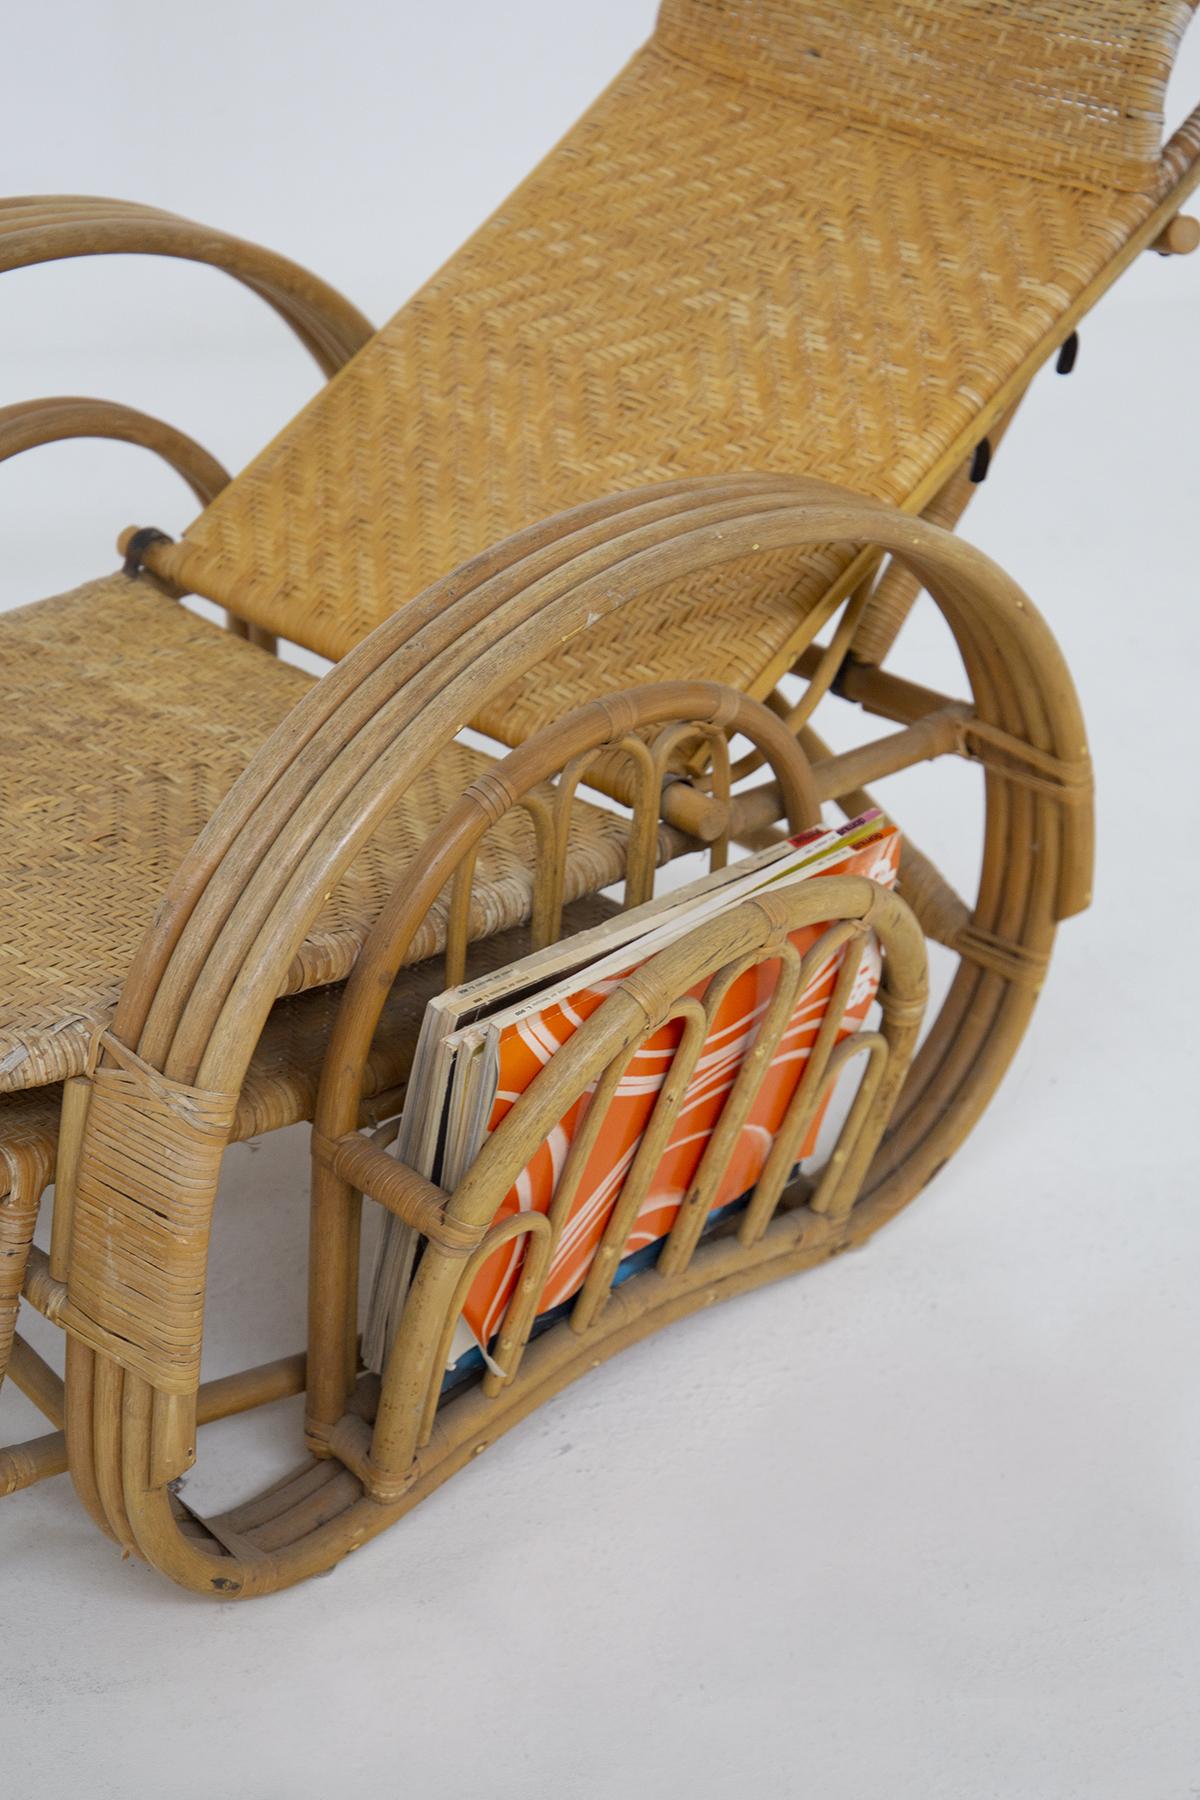 Vintage rattan and bamboo armchair designed in the 1950s, fine Italian manufacture. The armchair is adjustable and is made of bamboo and rattan, with very soft shapes. The seat and back are made of rattan, with a woven texture; a rattan headrest is